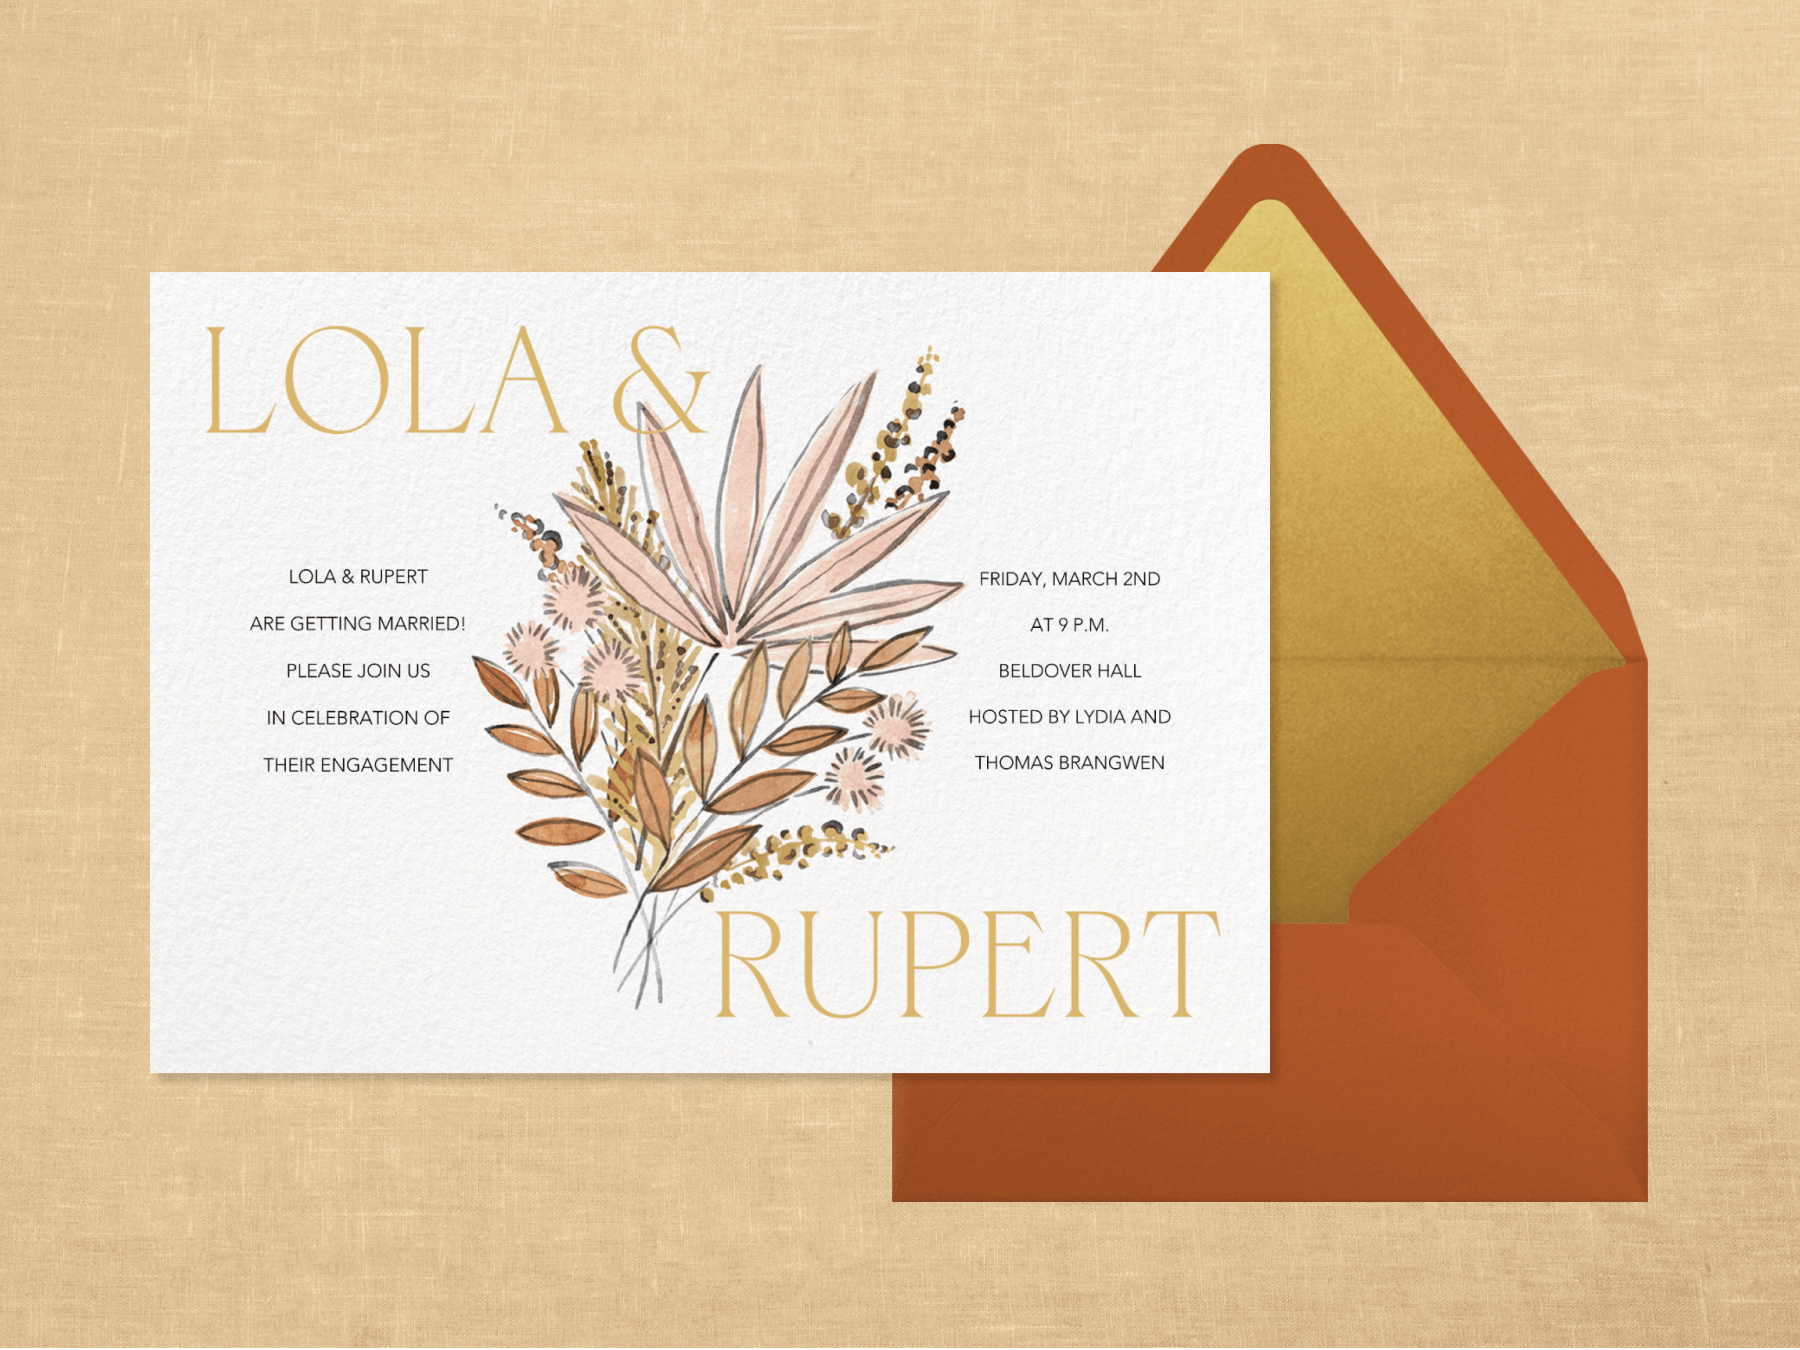 A horizontal engagement party invitation featuring a floral illustration and paired with an orange and gold envelope.